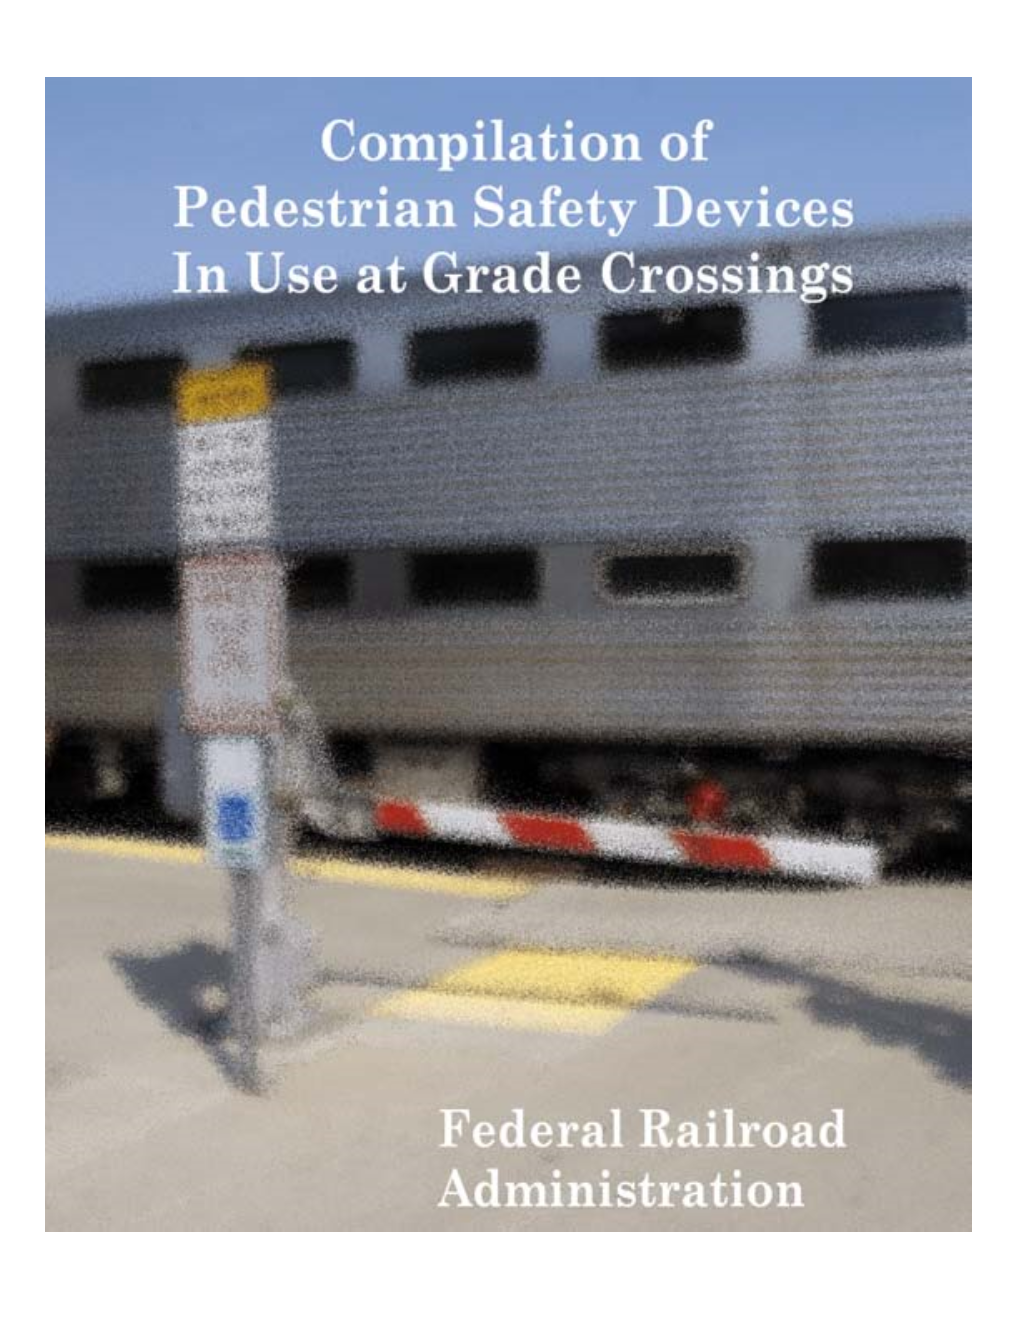 Compilation of Pedestrian Devices in Use at Grade Crossings January 2008